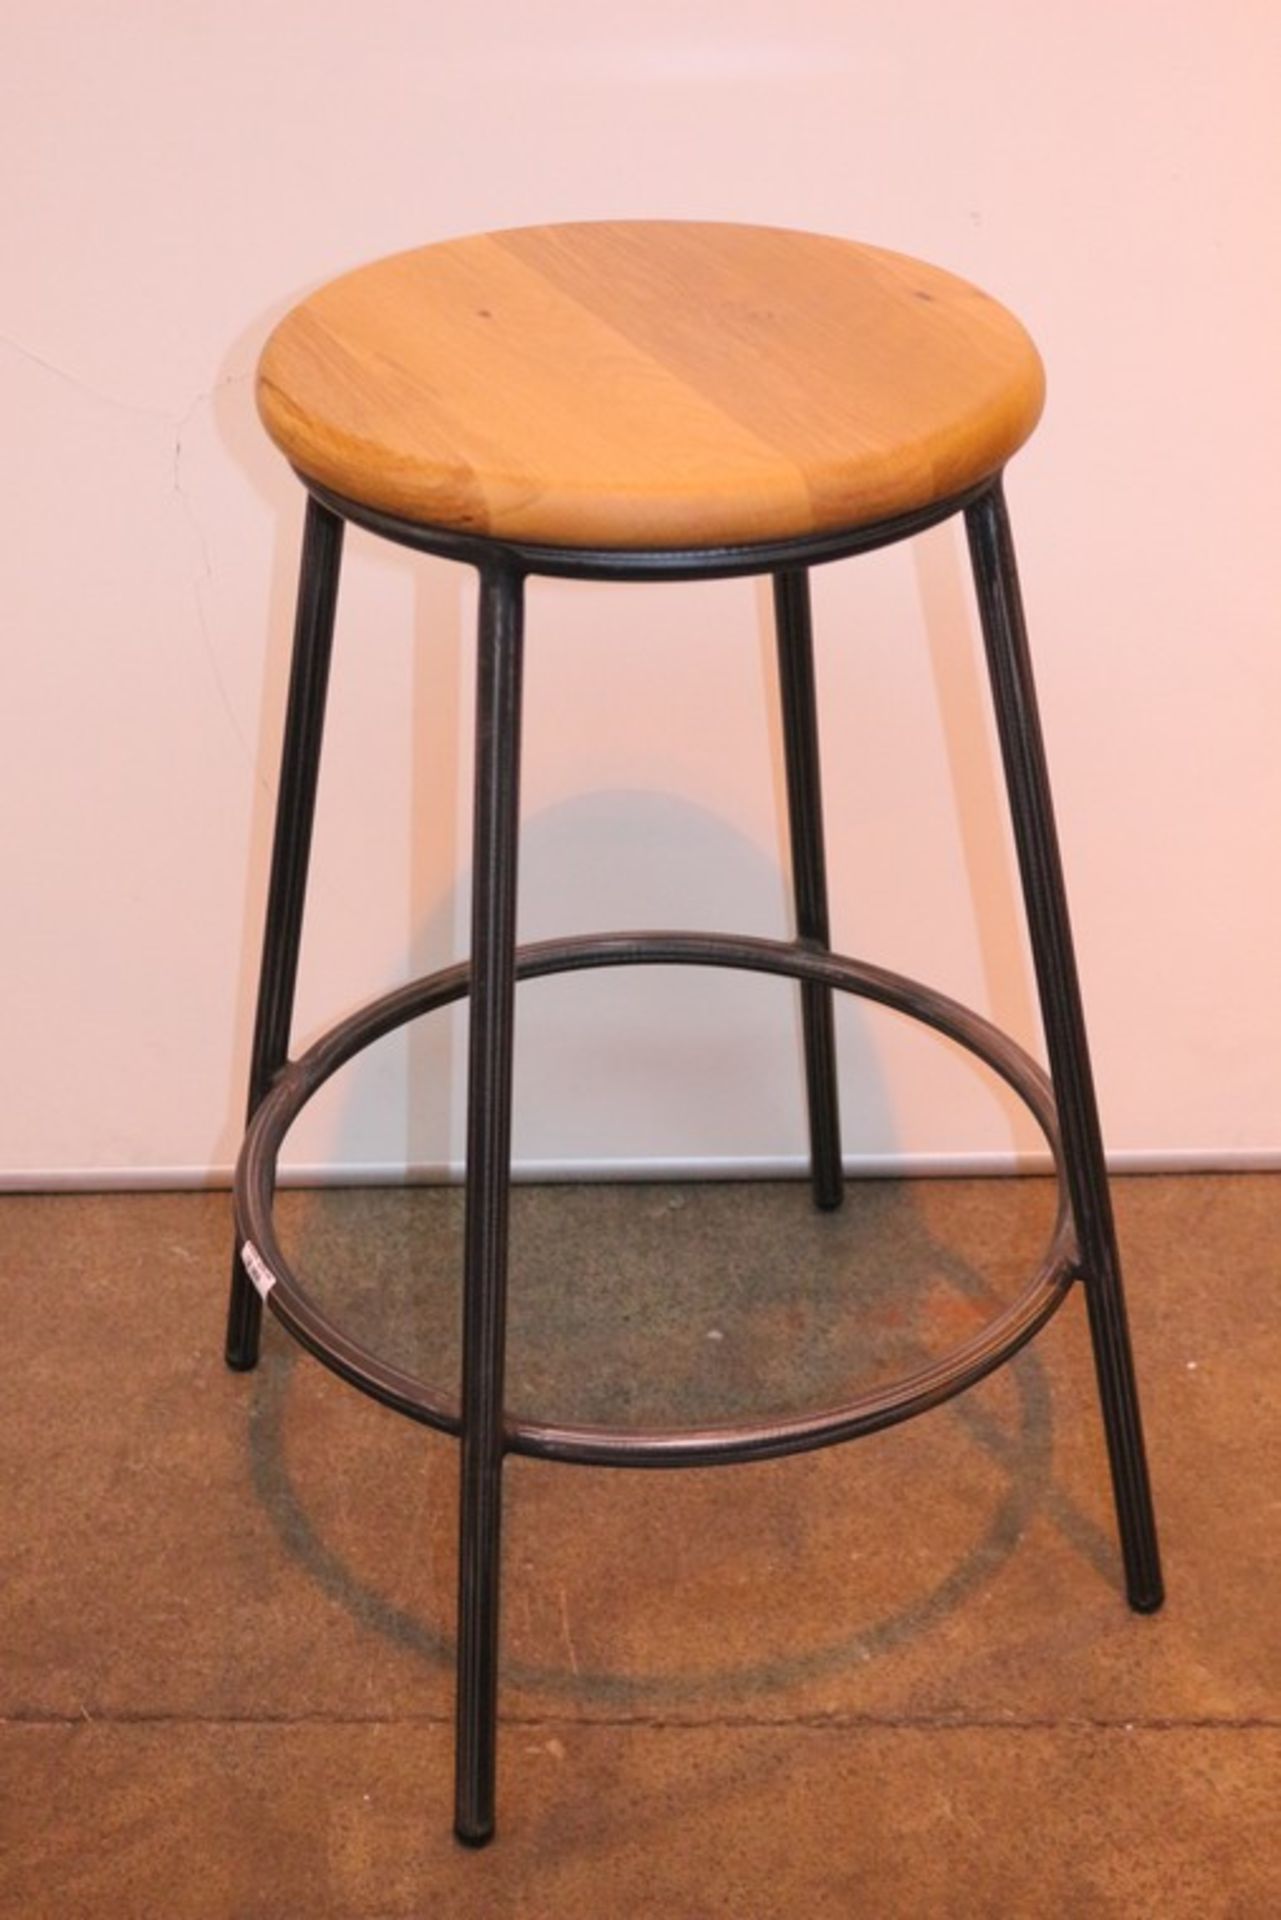 1 x BOXED CALIA SOLID LIGHT OAK AND METAL BAR STOOL (24176) RRP £95 *PLEASE NOTE THAT THE BID